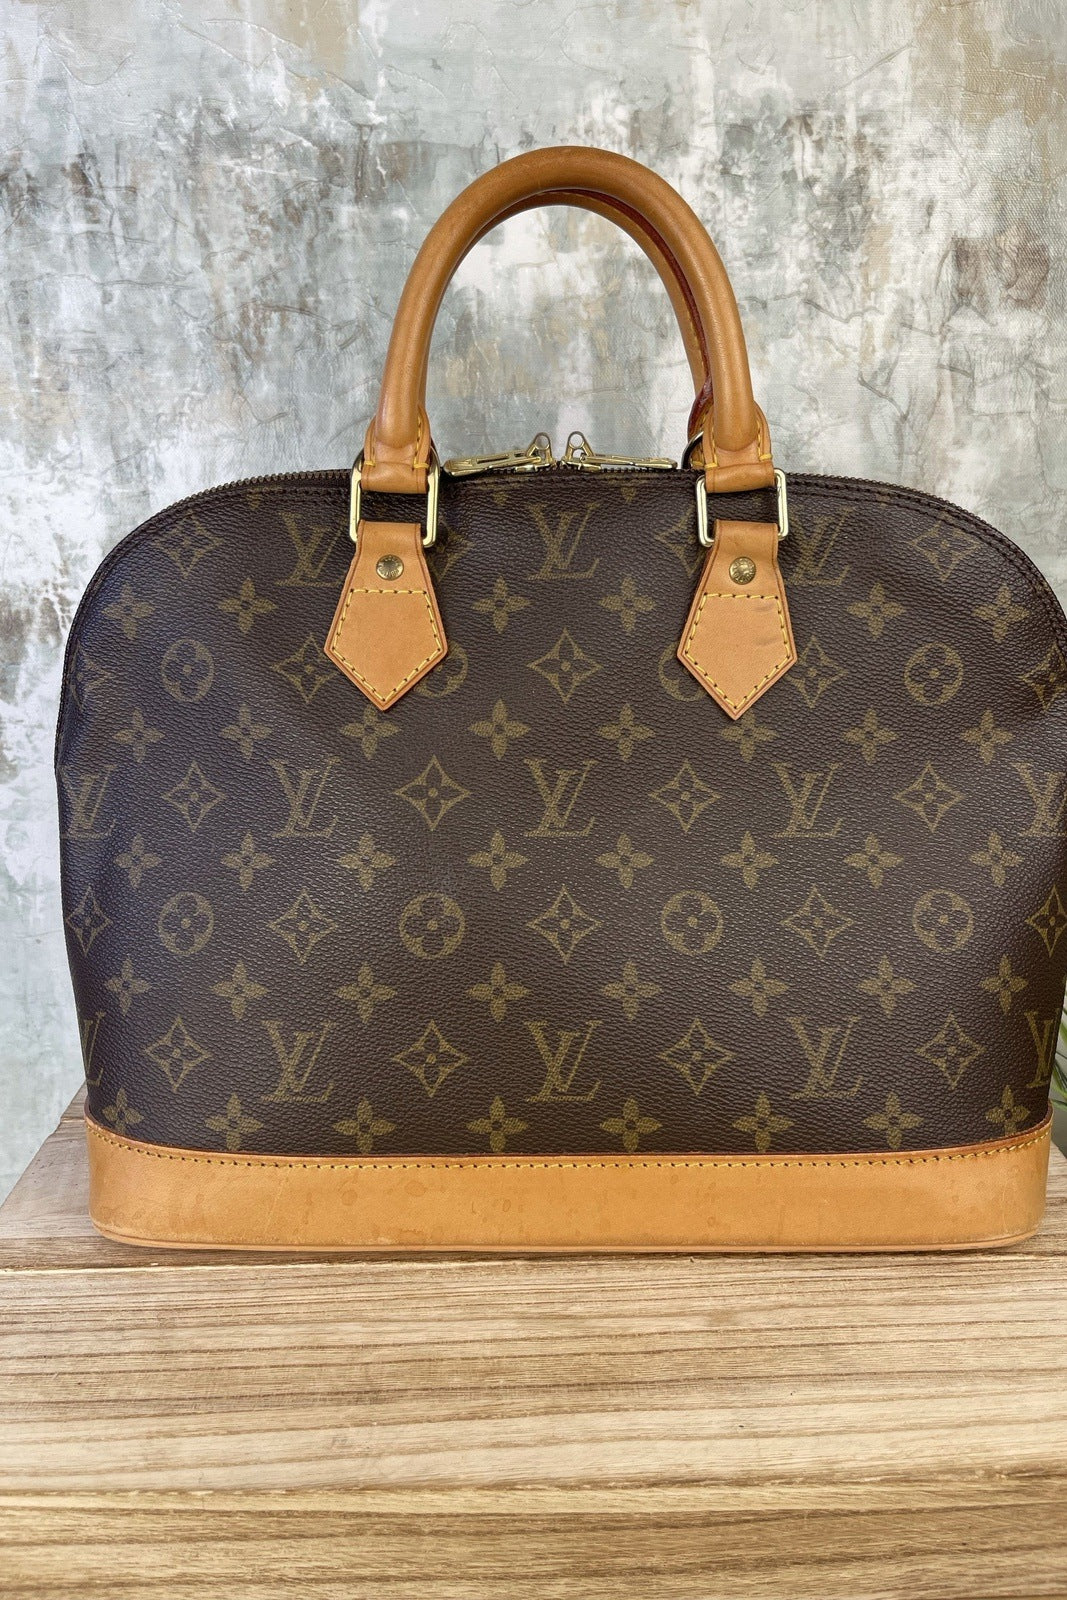 Louis Vuitton Tarnish Stain and Ink Stain Removal